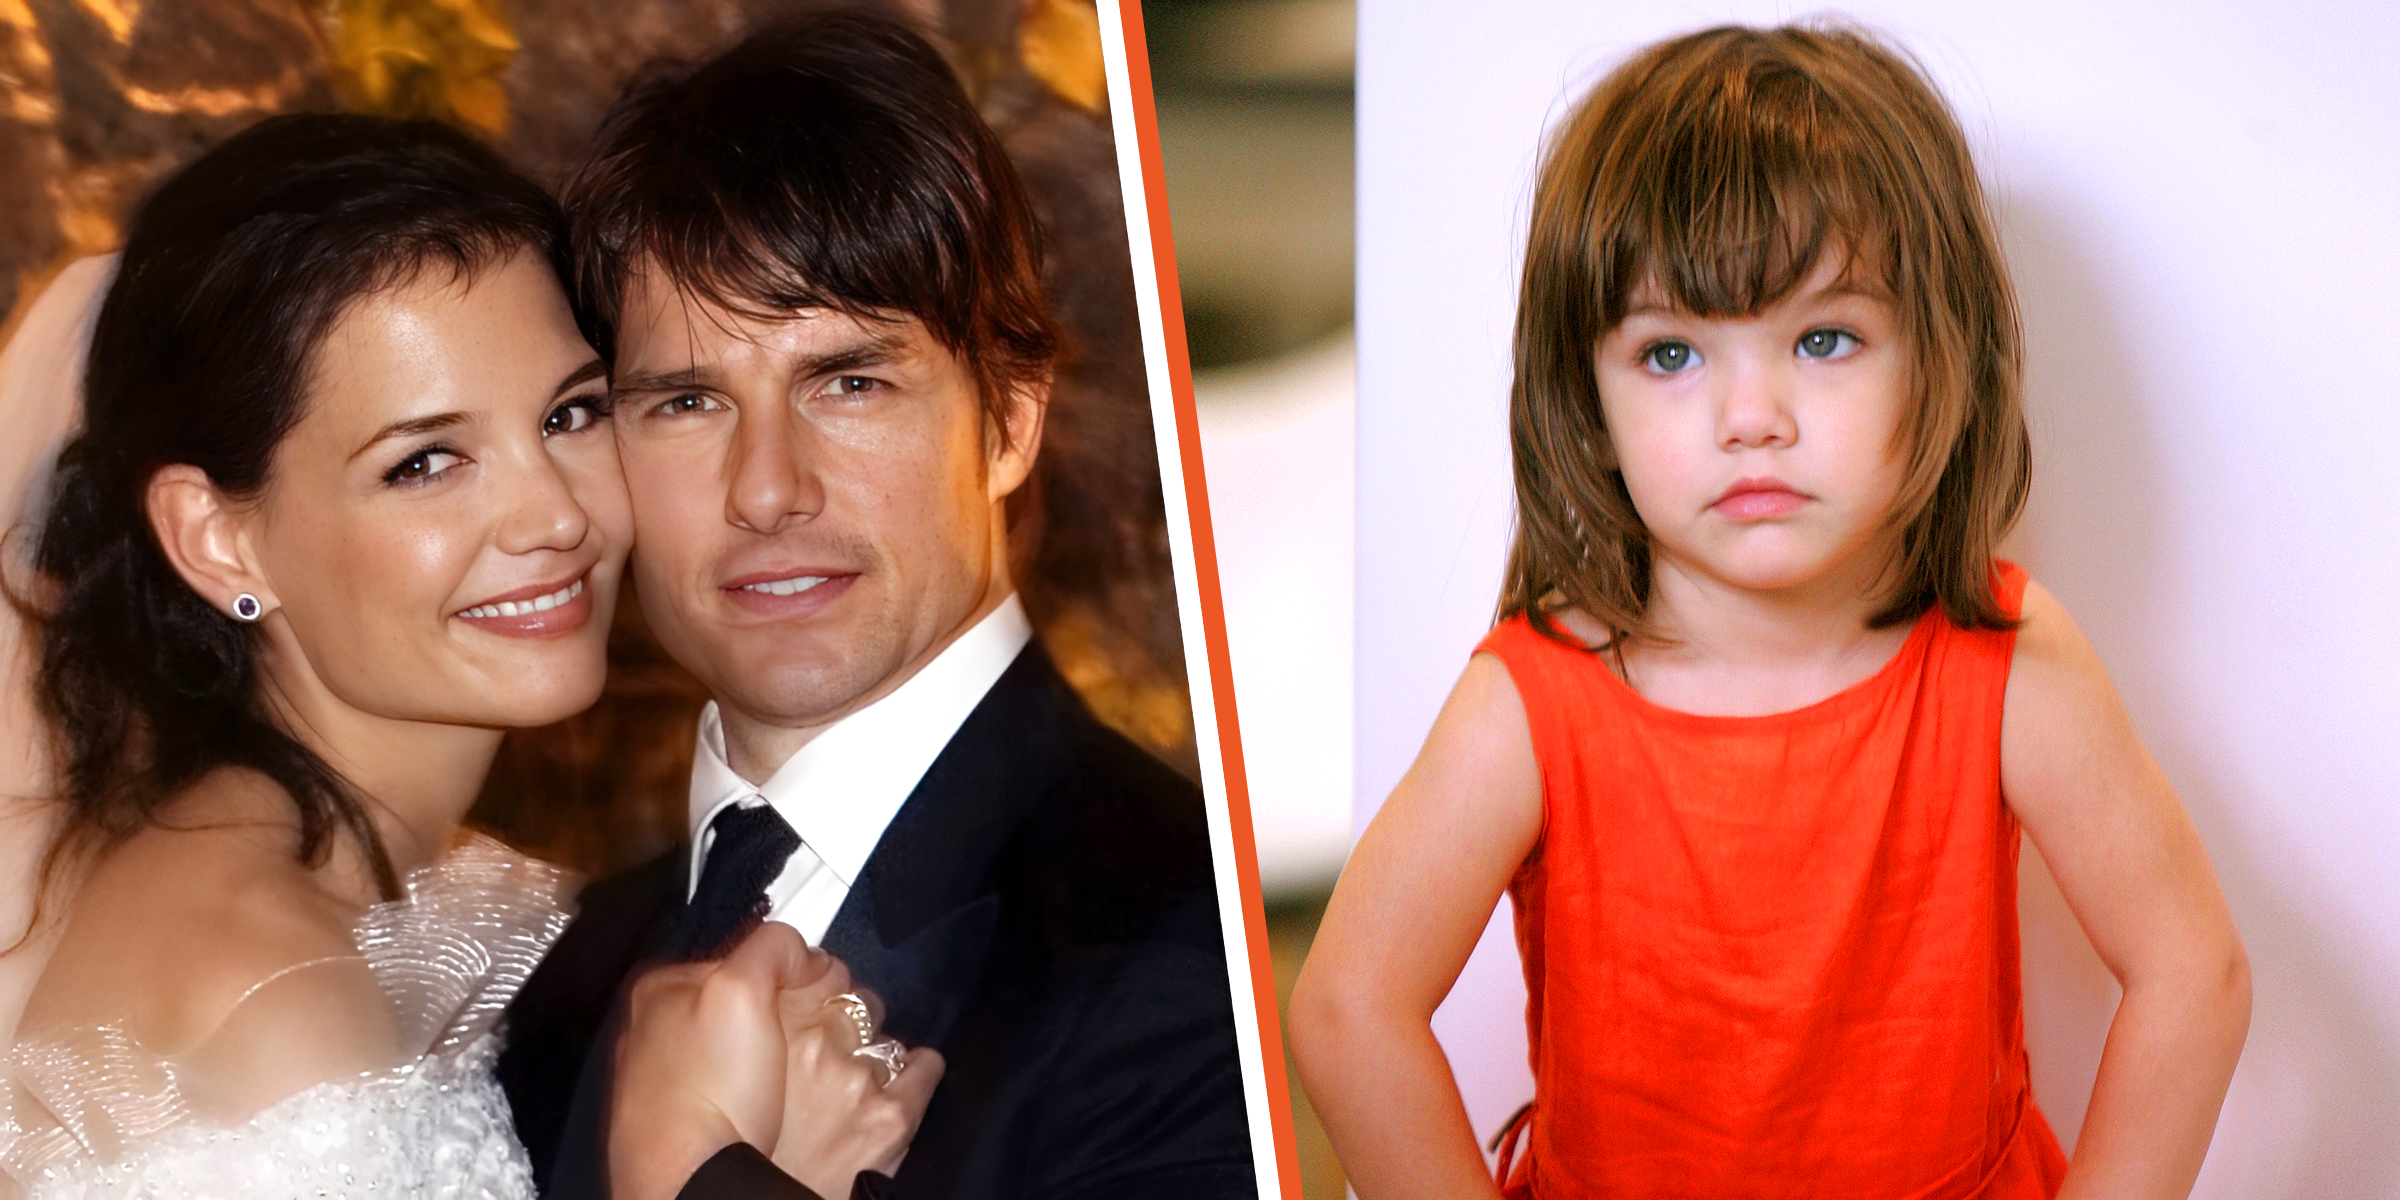 Katie Holmes and Tom Cruise | Suri Cruise | Source: Getty Images